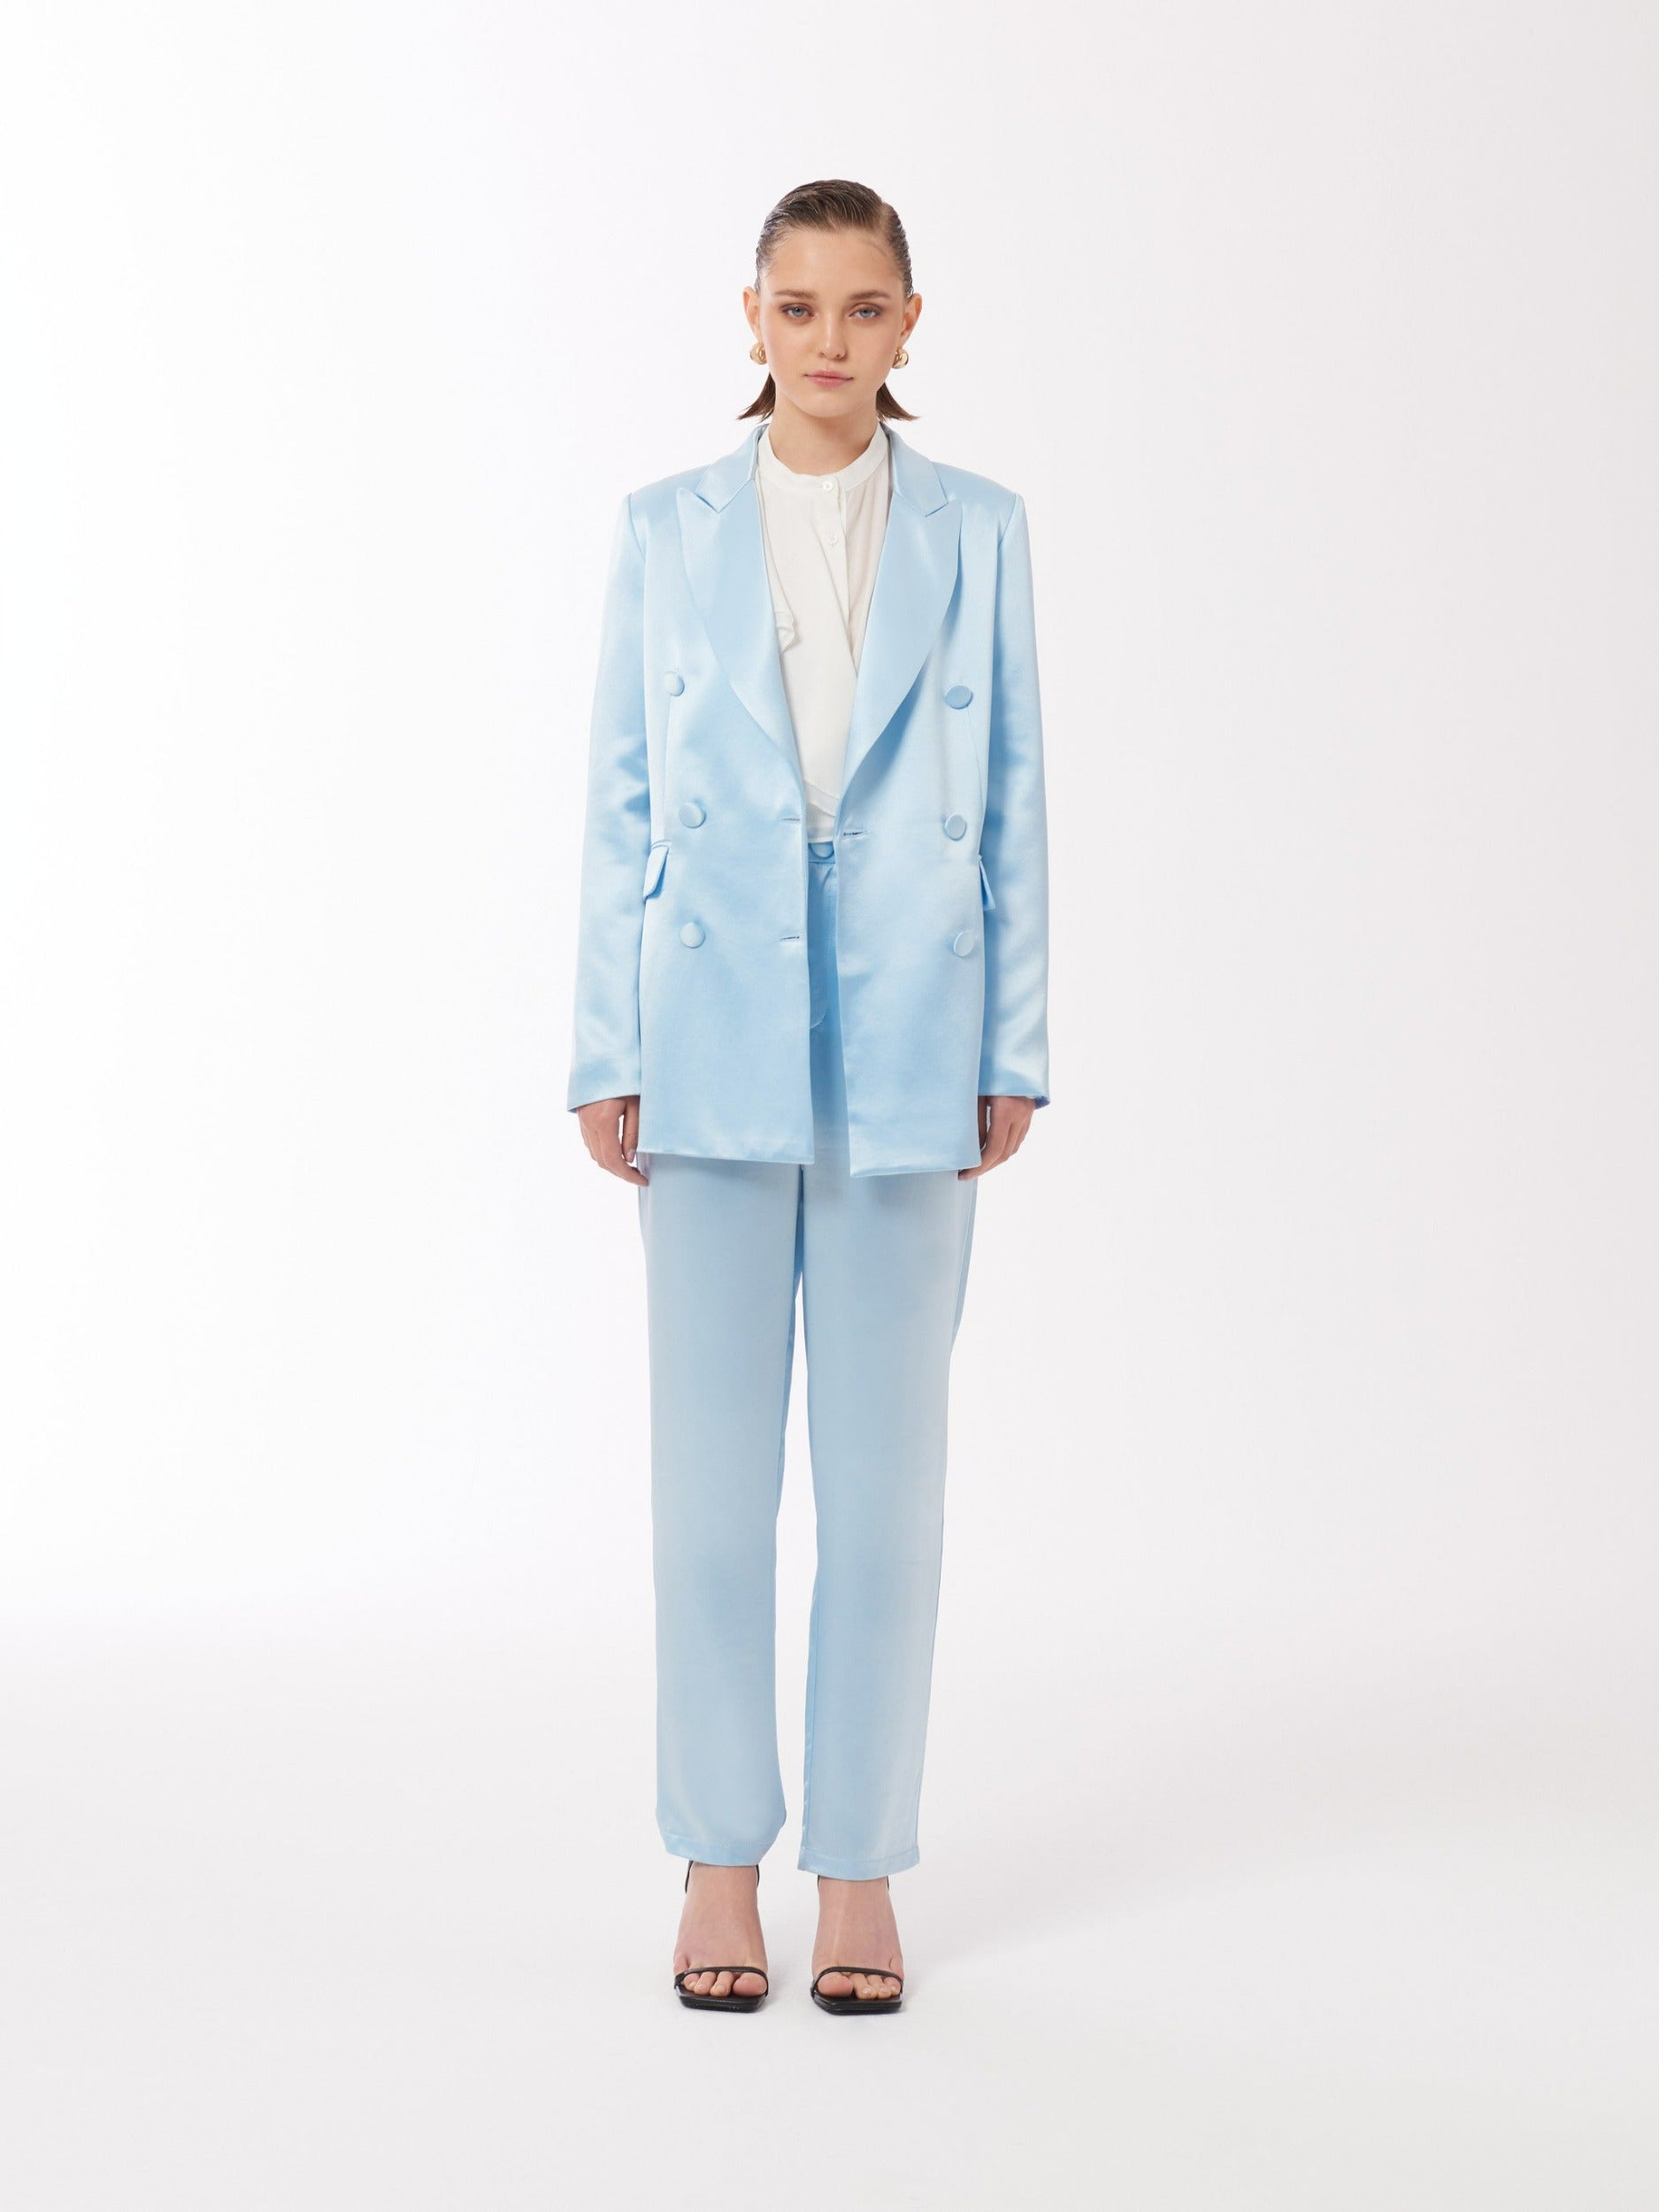 Satin Double-Breasted Blazer Jacket in Baby Blue – SOUR FIGS OFFICIAL